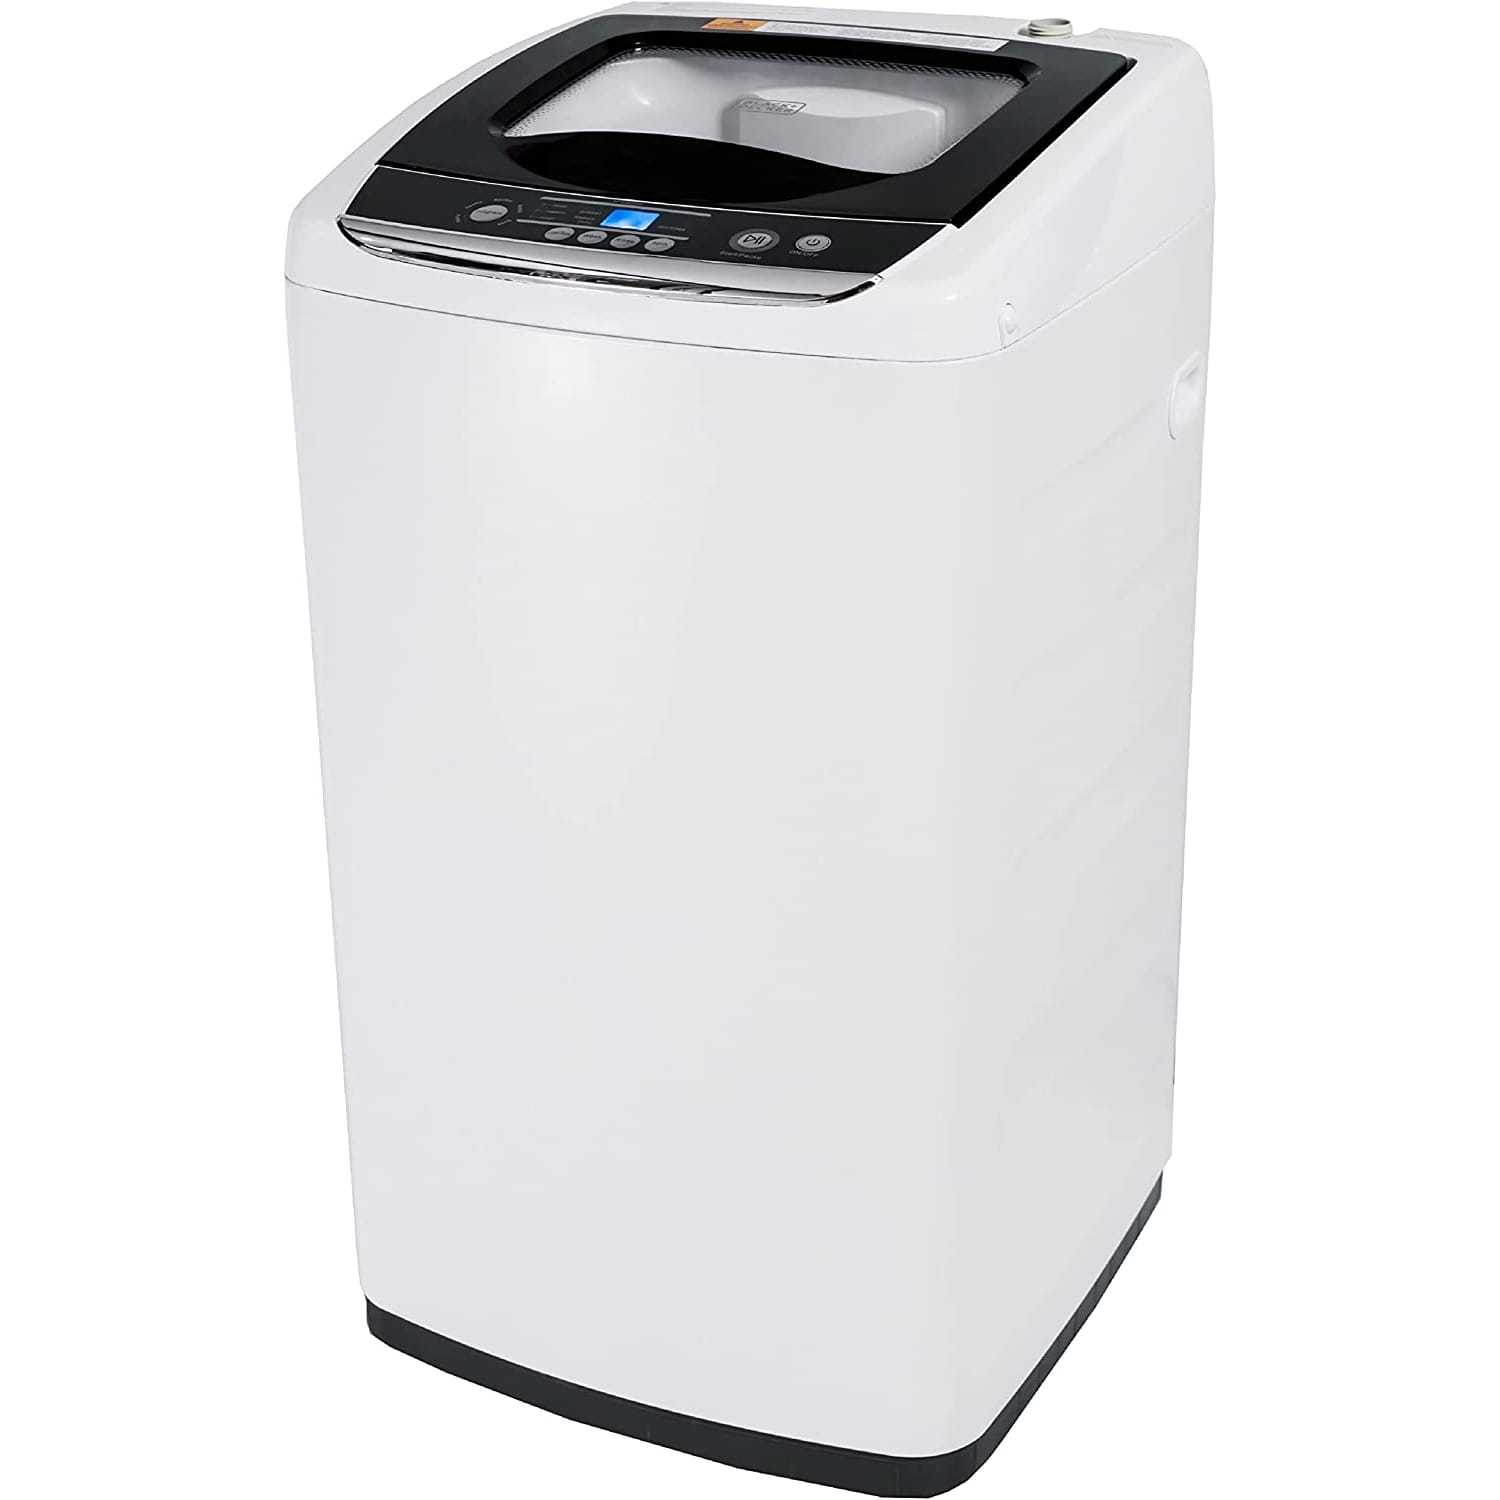 Best Mini Foldable Washing Machines: Your Portable Companion For Anywhere  And Everywhere